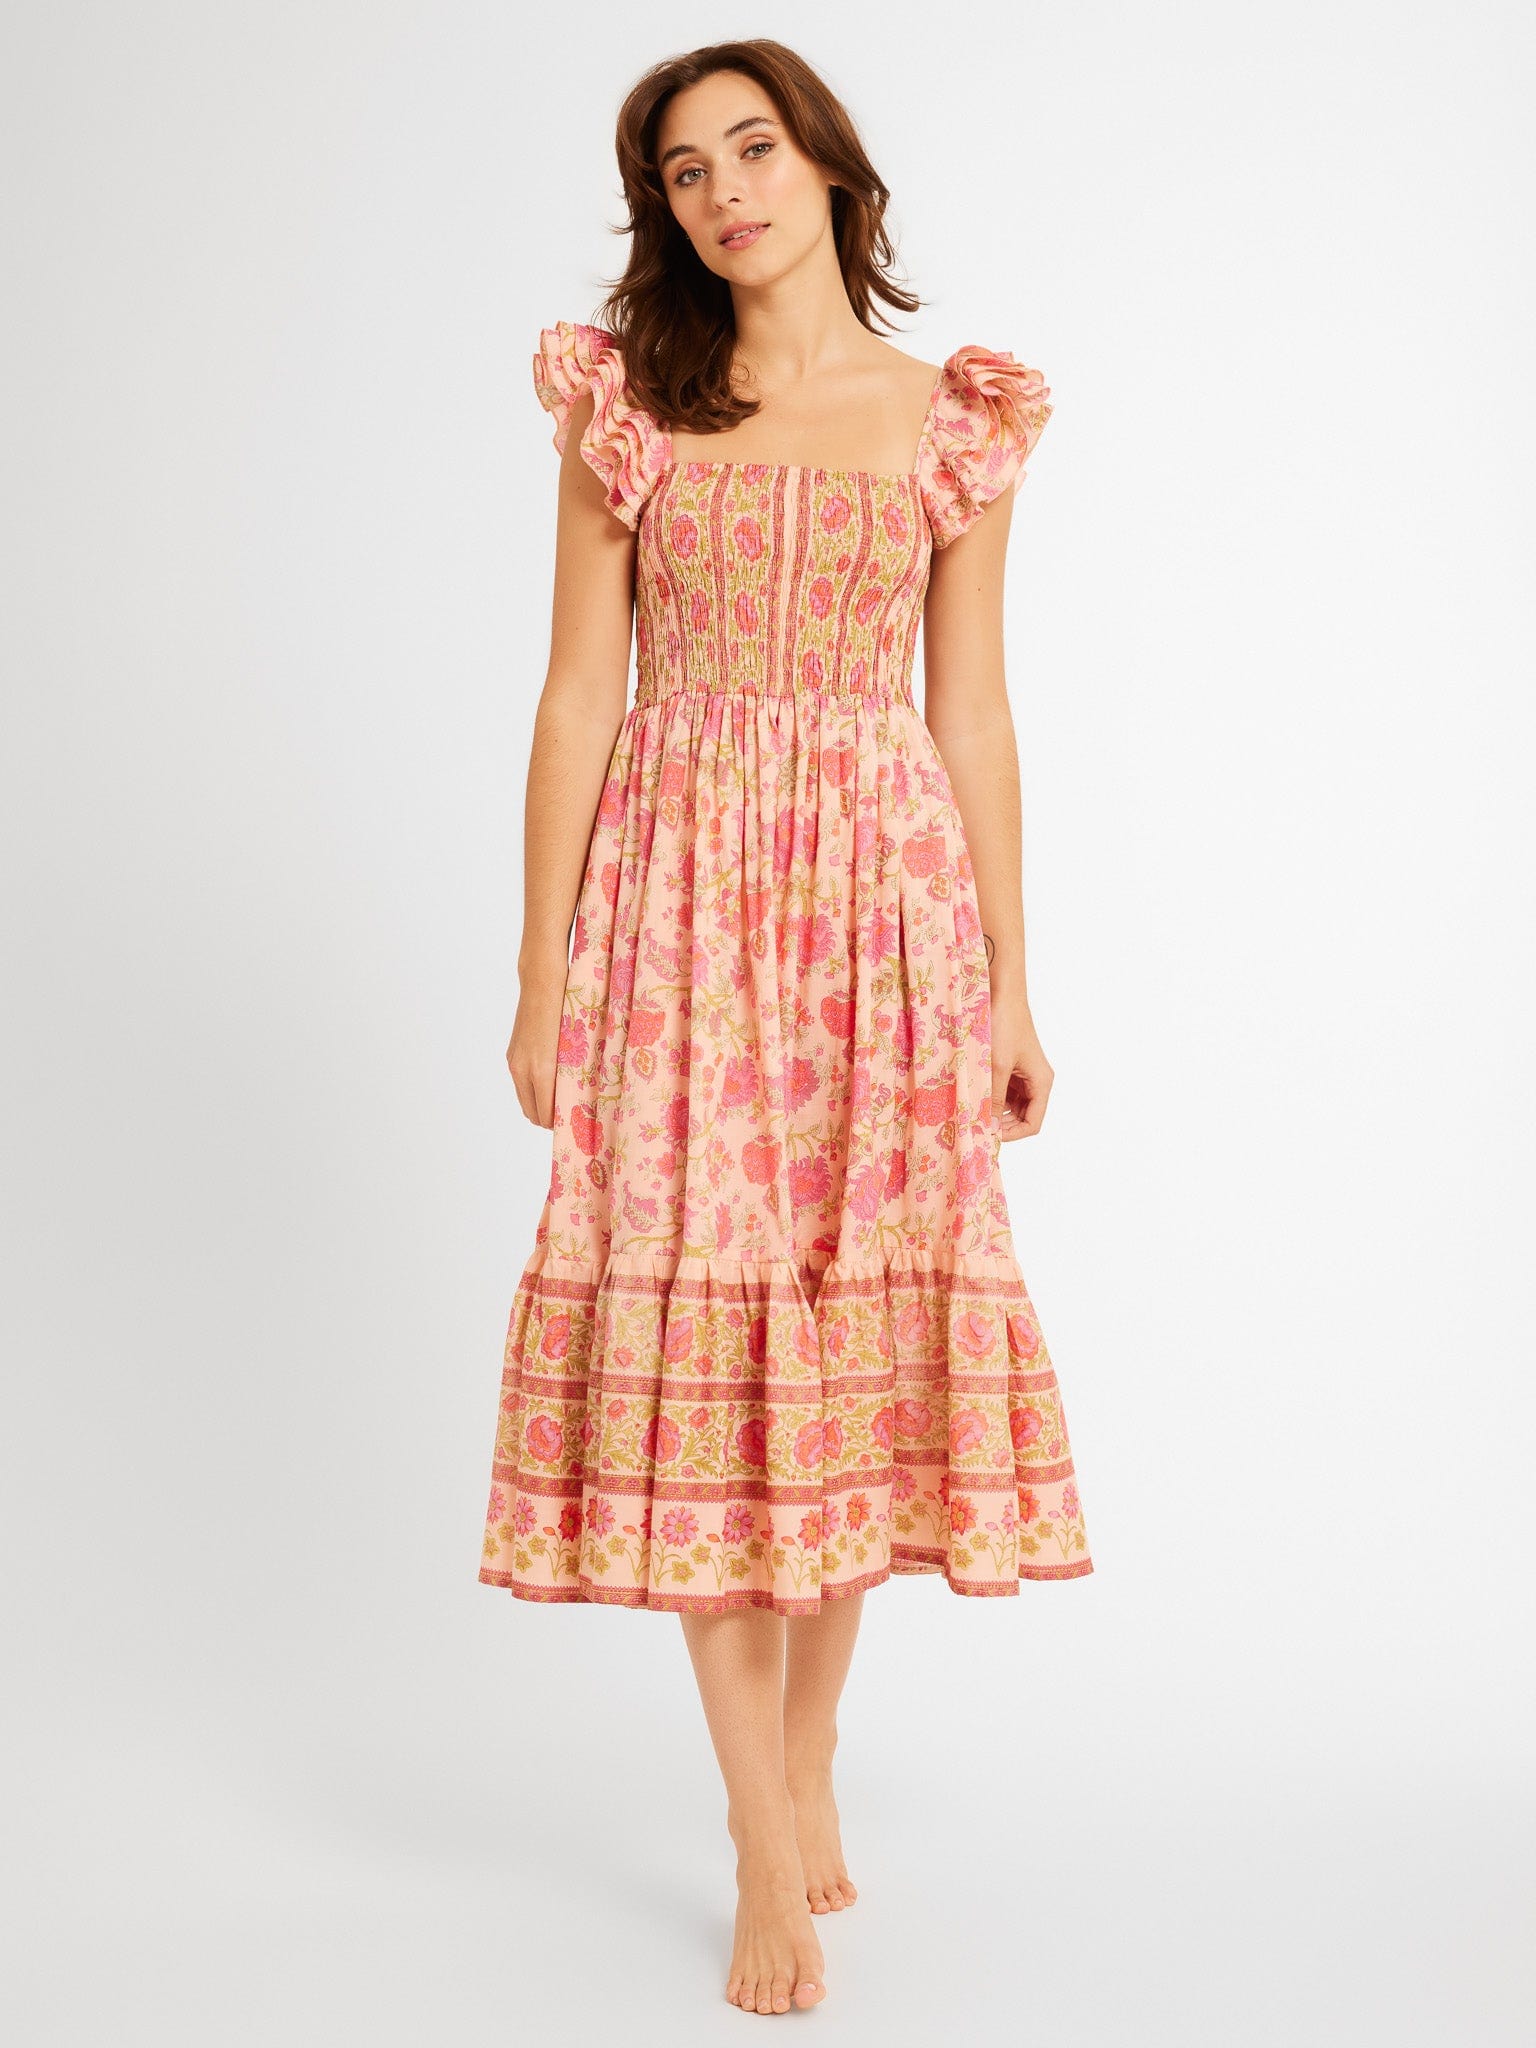 MILLE Clothing Olympia Dress in Desert Bloom